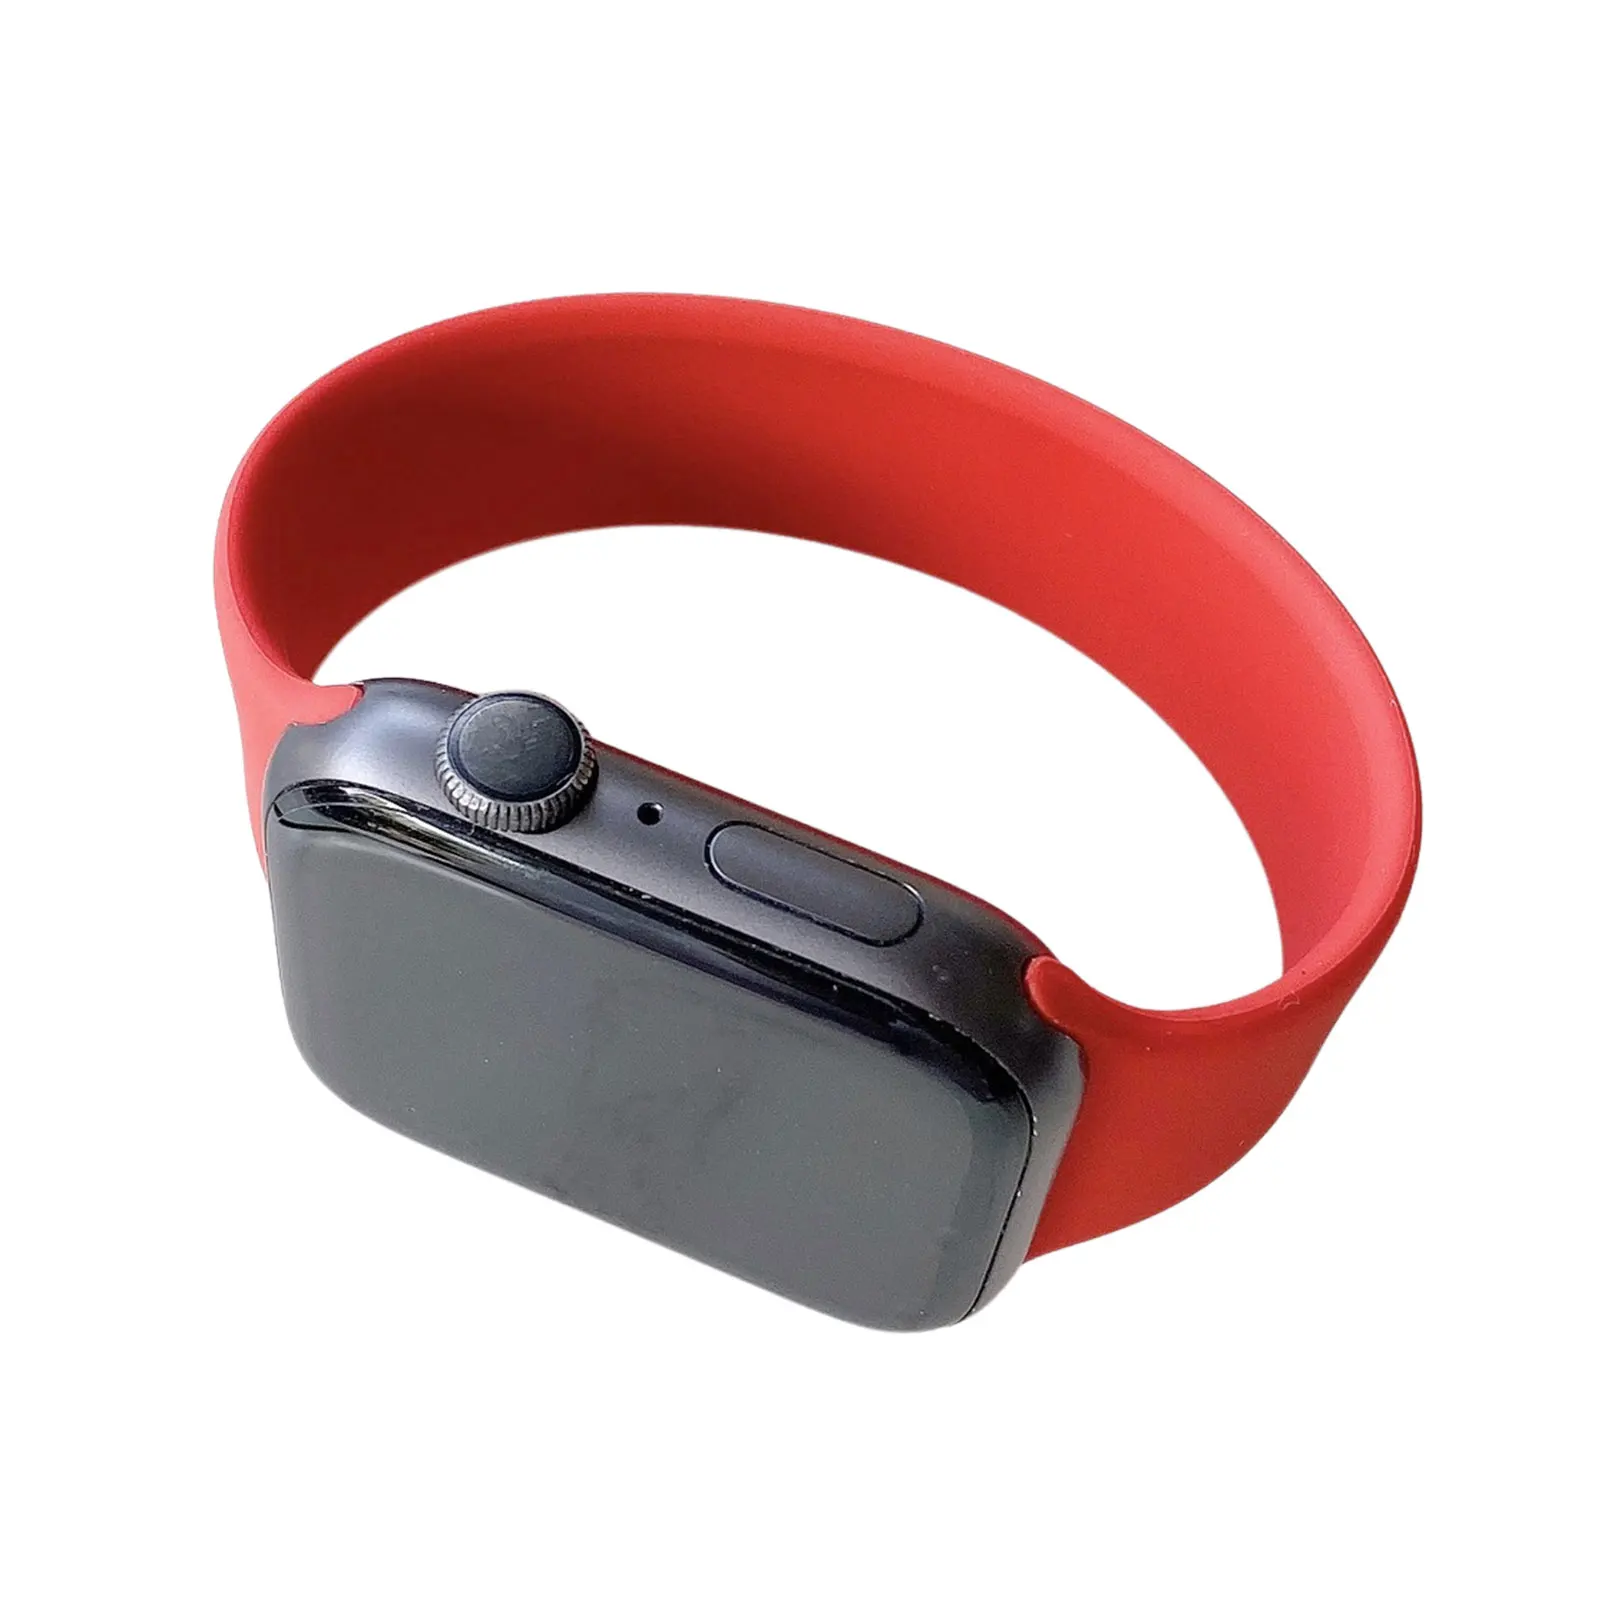 Colorful Silicone for Apple Watch Band 44mm 40mm iWatch 38mm 42mm Sport  Correa Bracelet Apple Watch Series 1/2/3/4/5/6/Se - China Strap and Watch  price